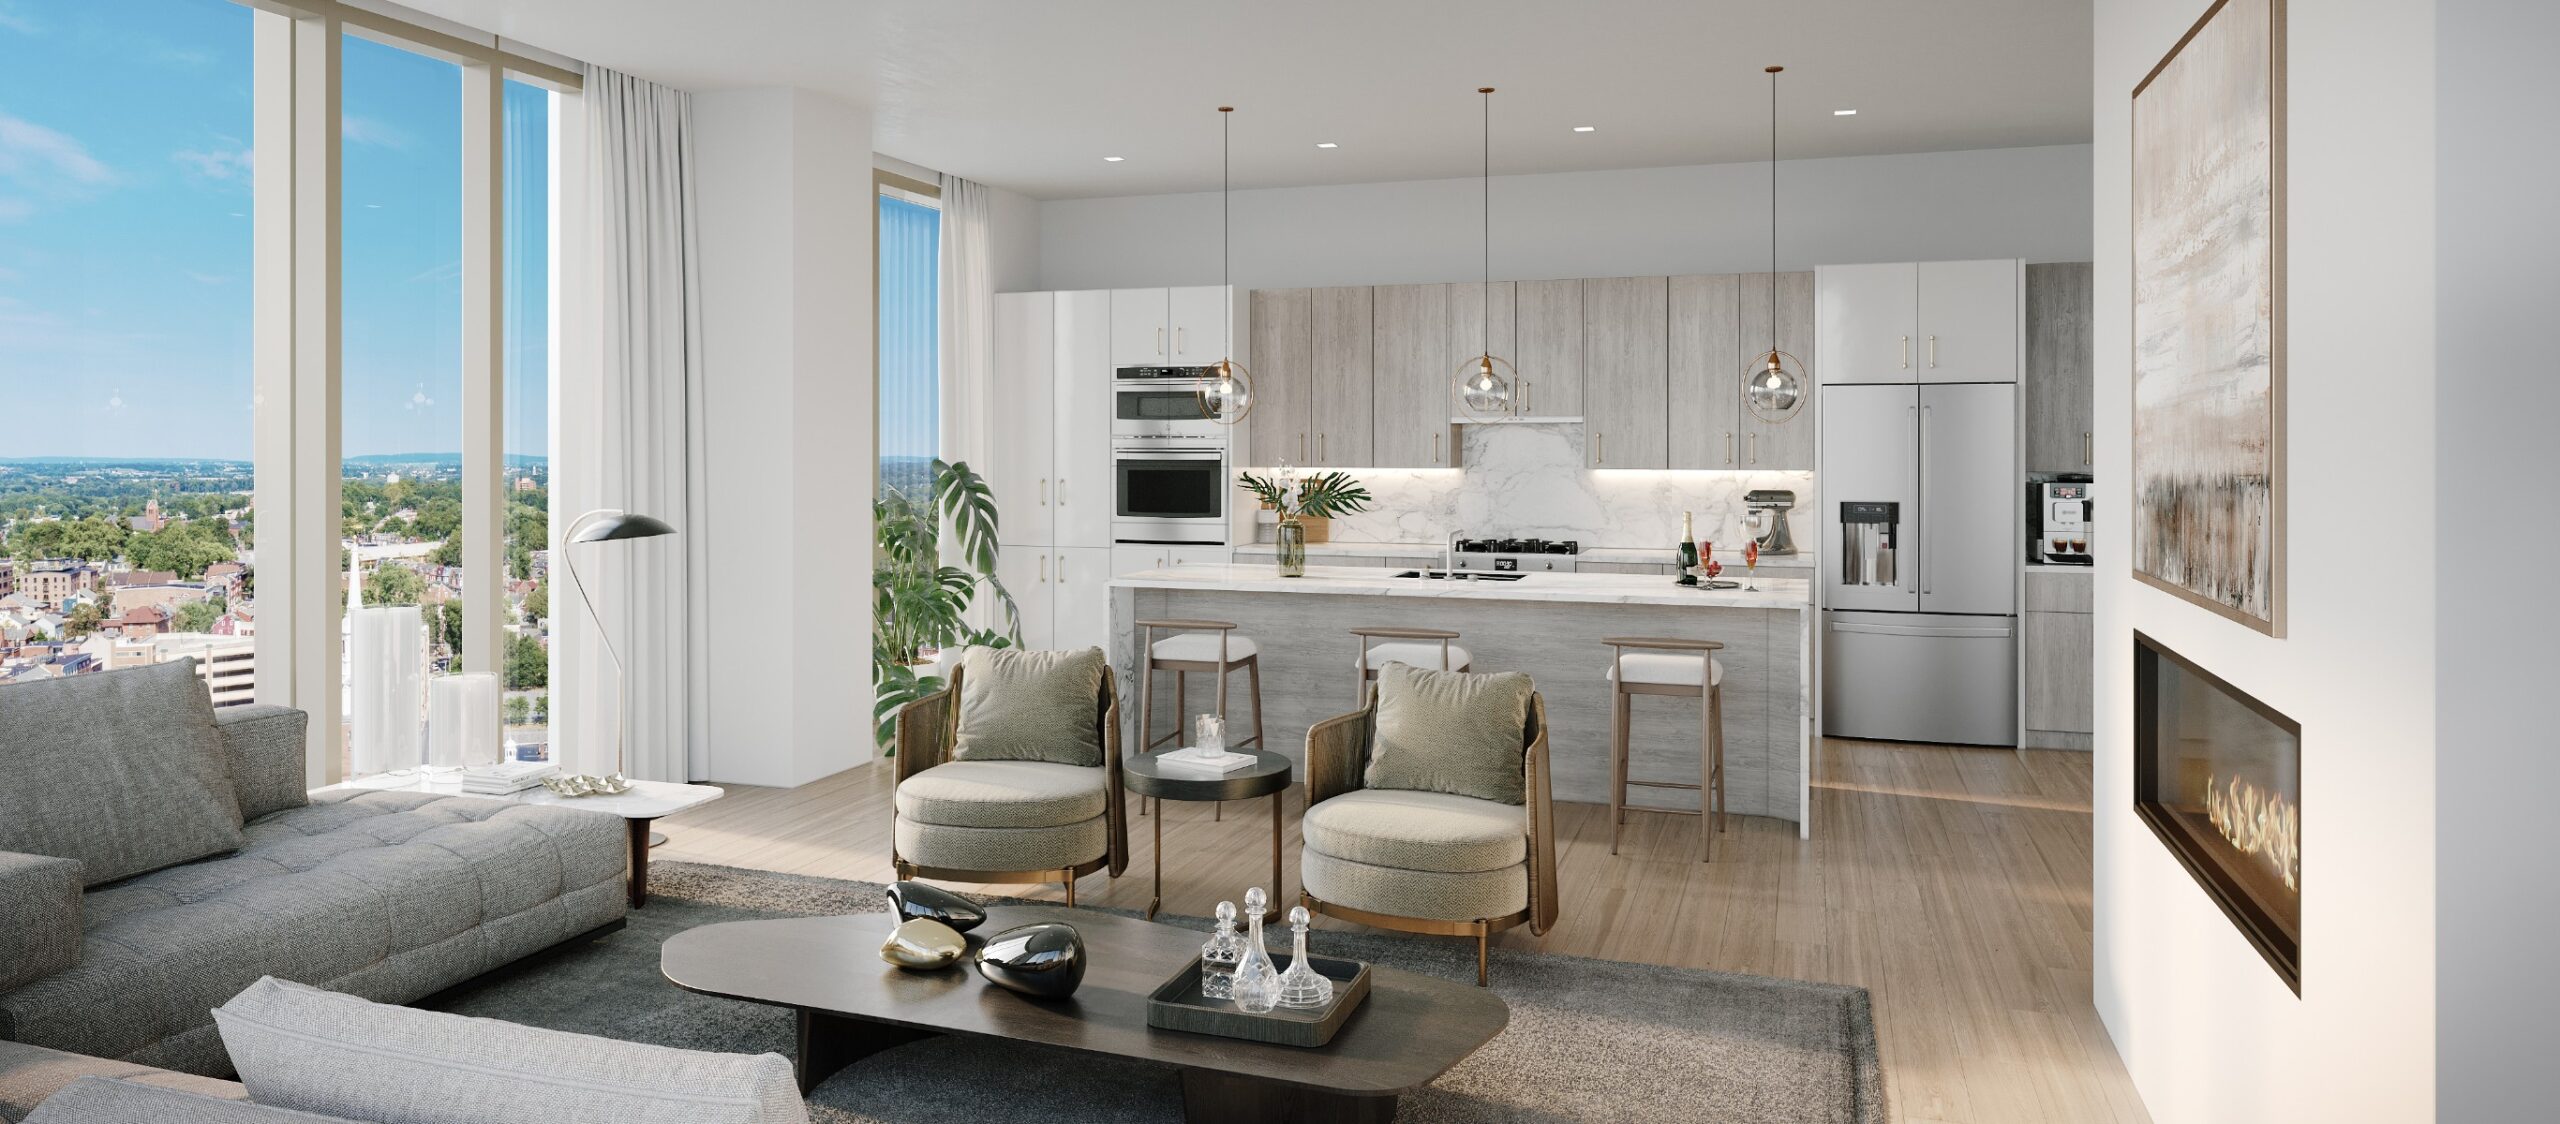 A 55+ retirement community showcasing a living room with city views.